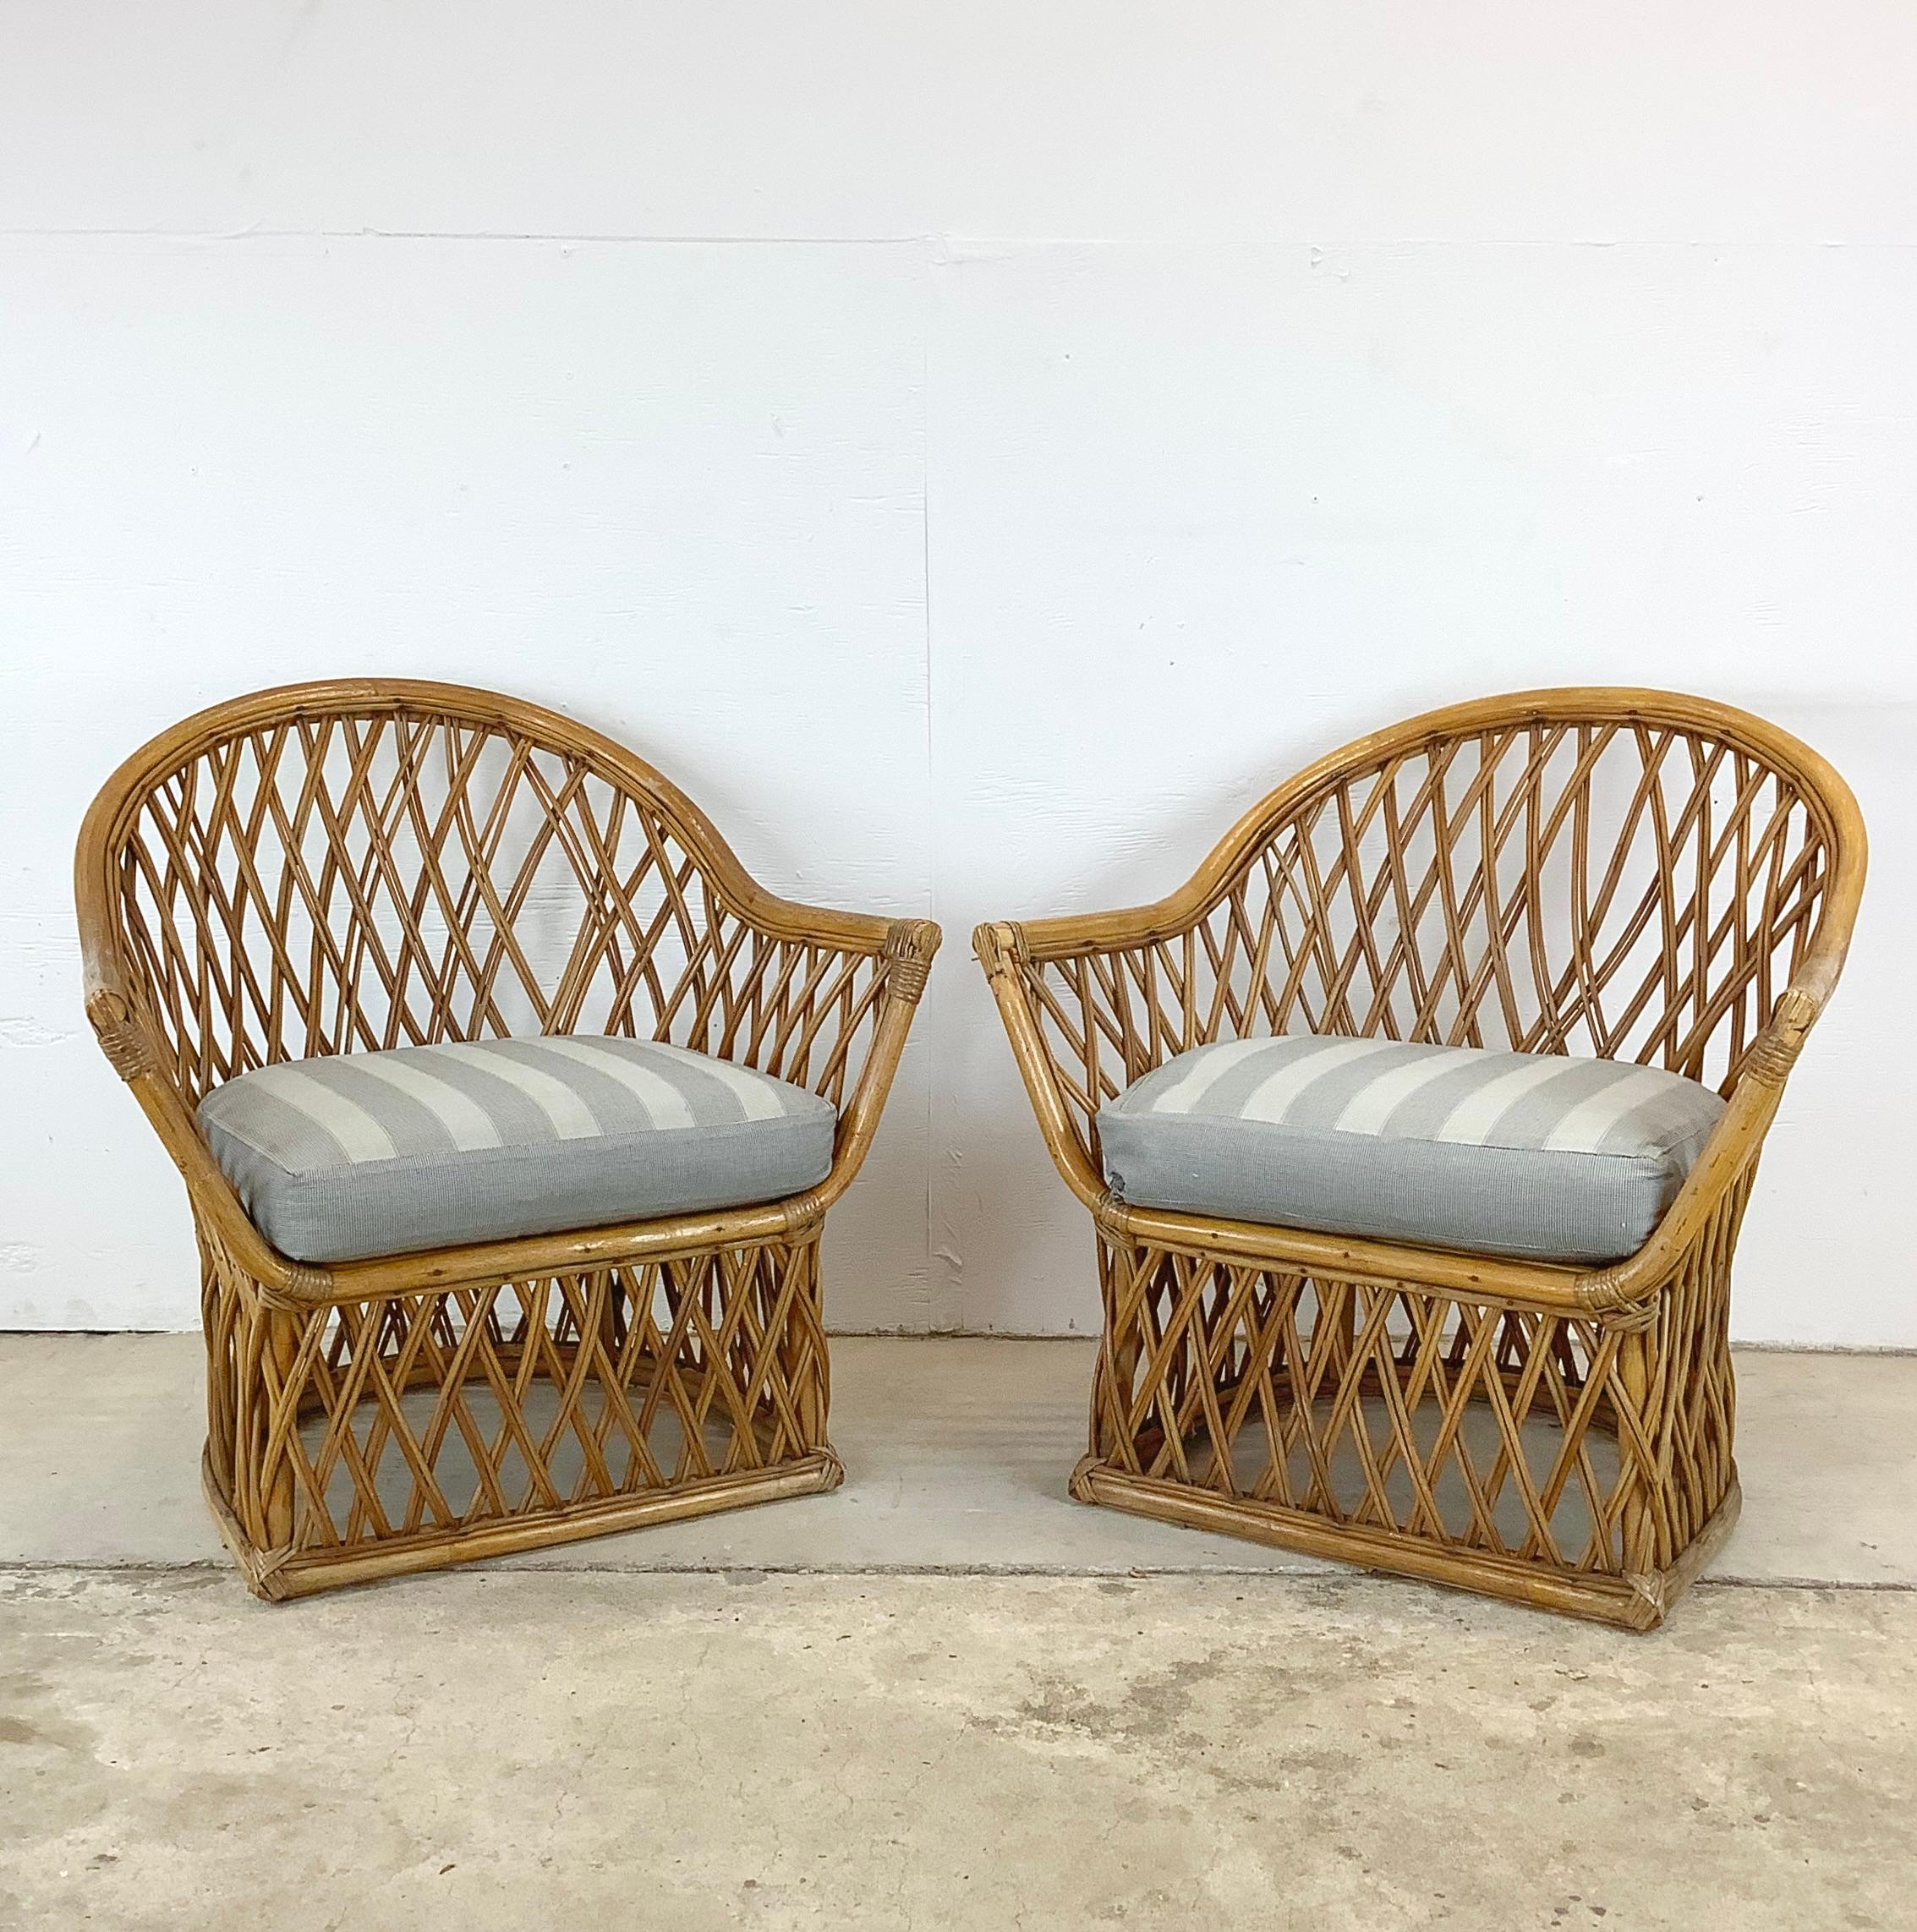 Picture yourself by the seaside, the gentle ocean breeze rustling through the palm fronds, the sun casting its warm embrace, and you, comfortably nestled in this pair of vintage Coastal Rattan Lounge Chairs. These chairs aren't just pieces of